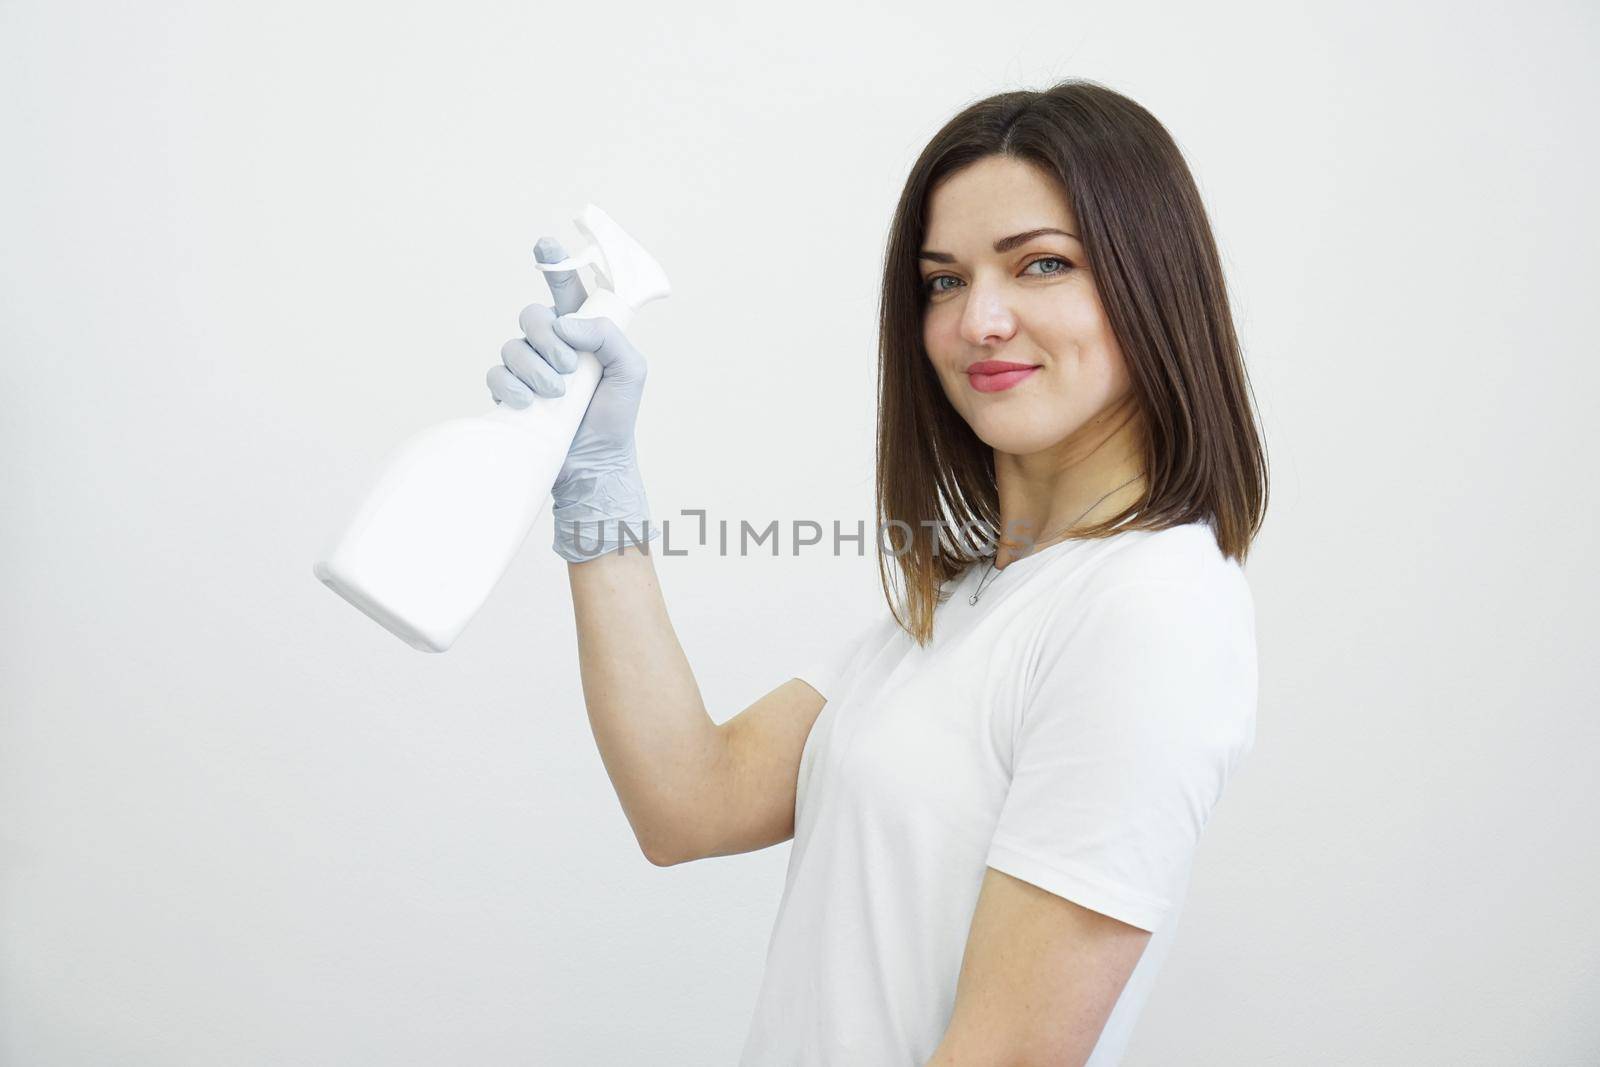 Woman holds spray bottle - antiseptic or detergent like guns. Health concept by natali_brill